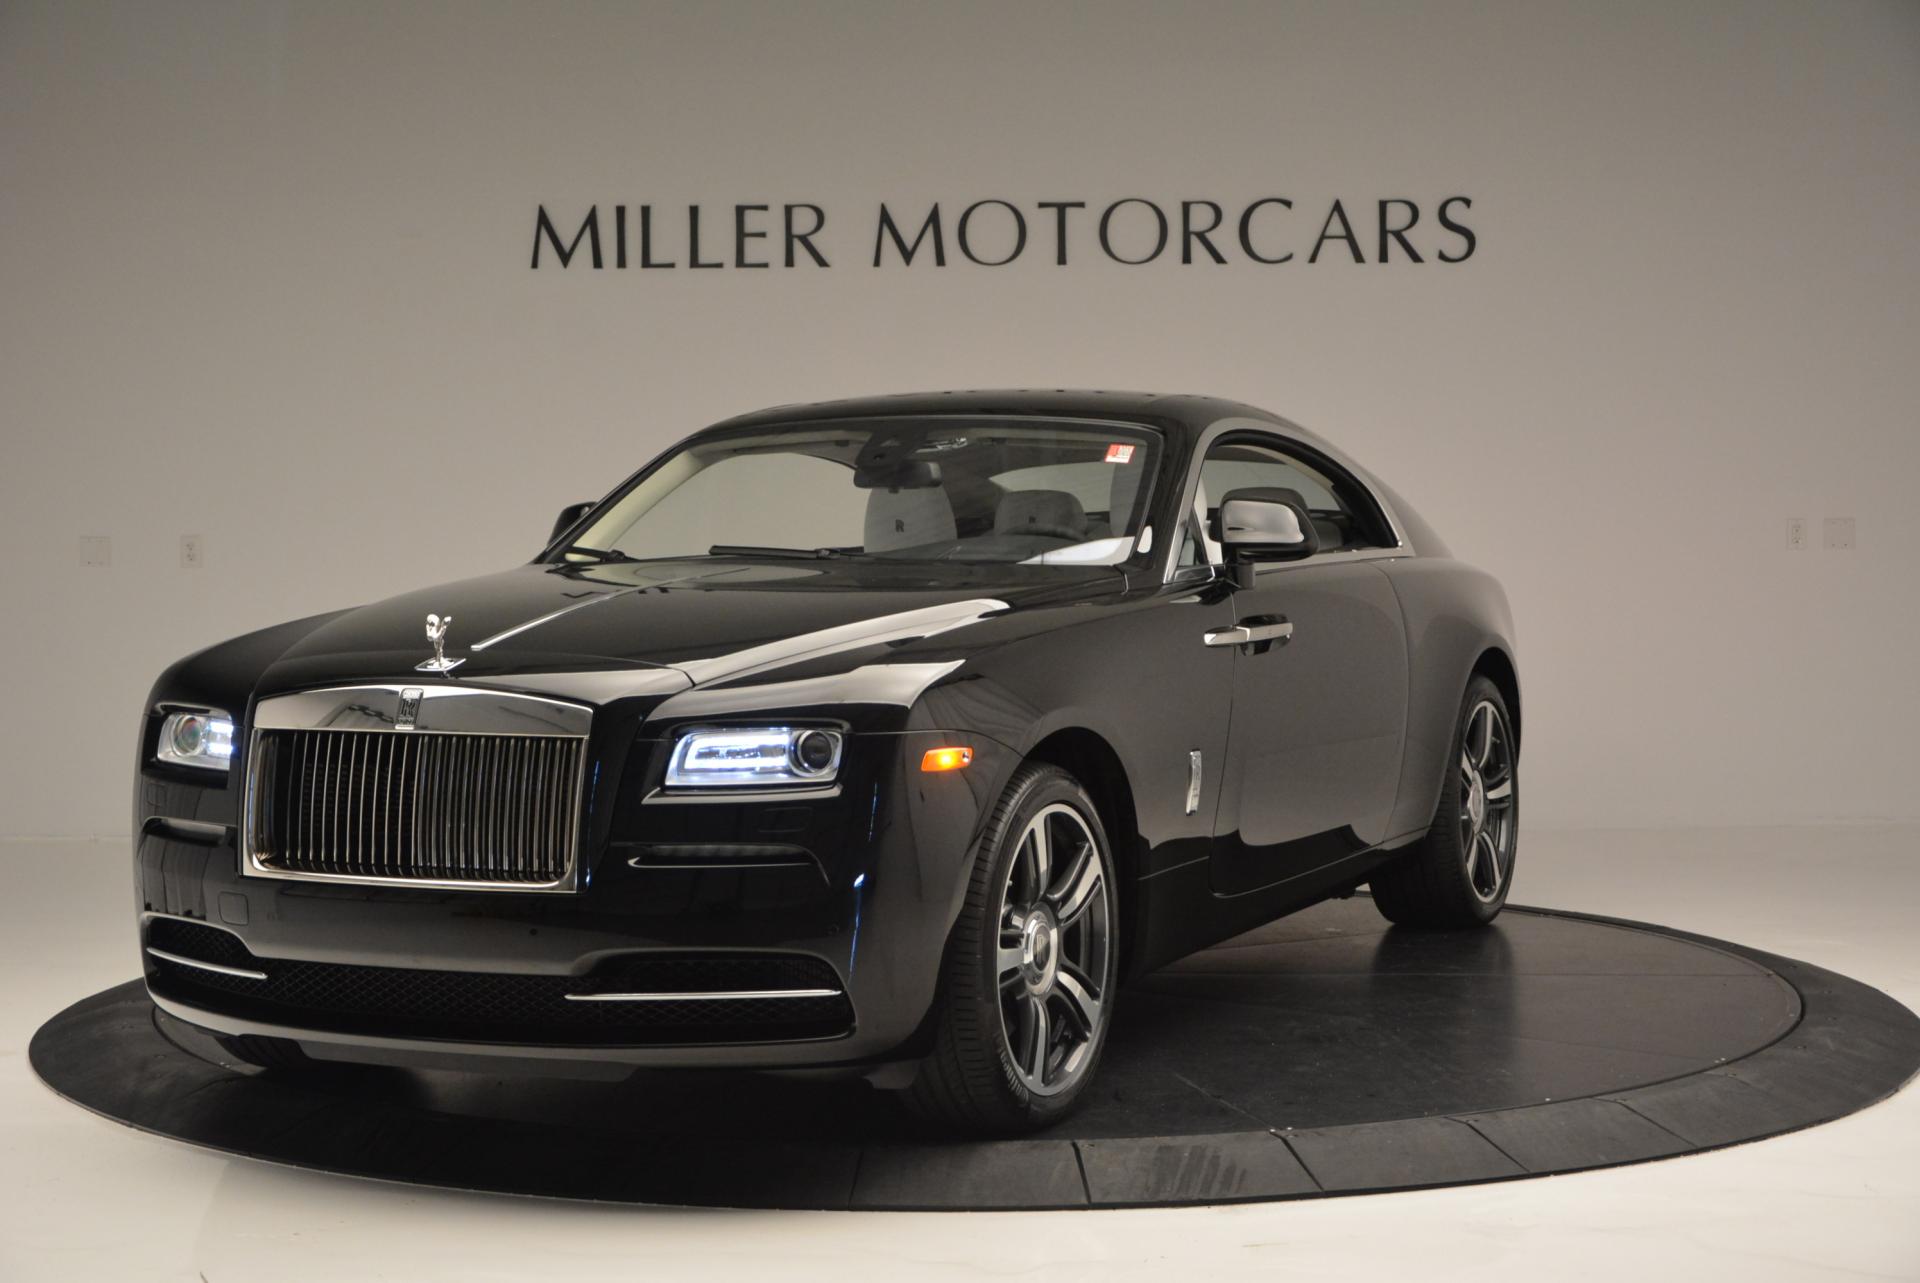 New 2016 Rolls-Royce Wraith for sale Sold at Bentley Greenwich in Greenwich CT 06830 1